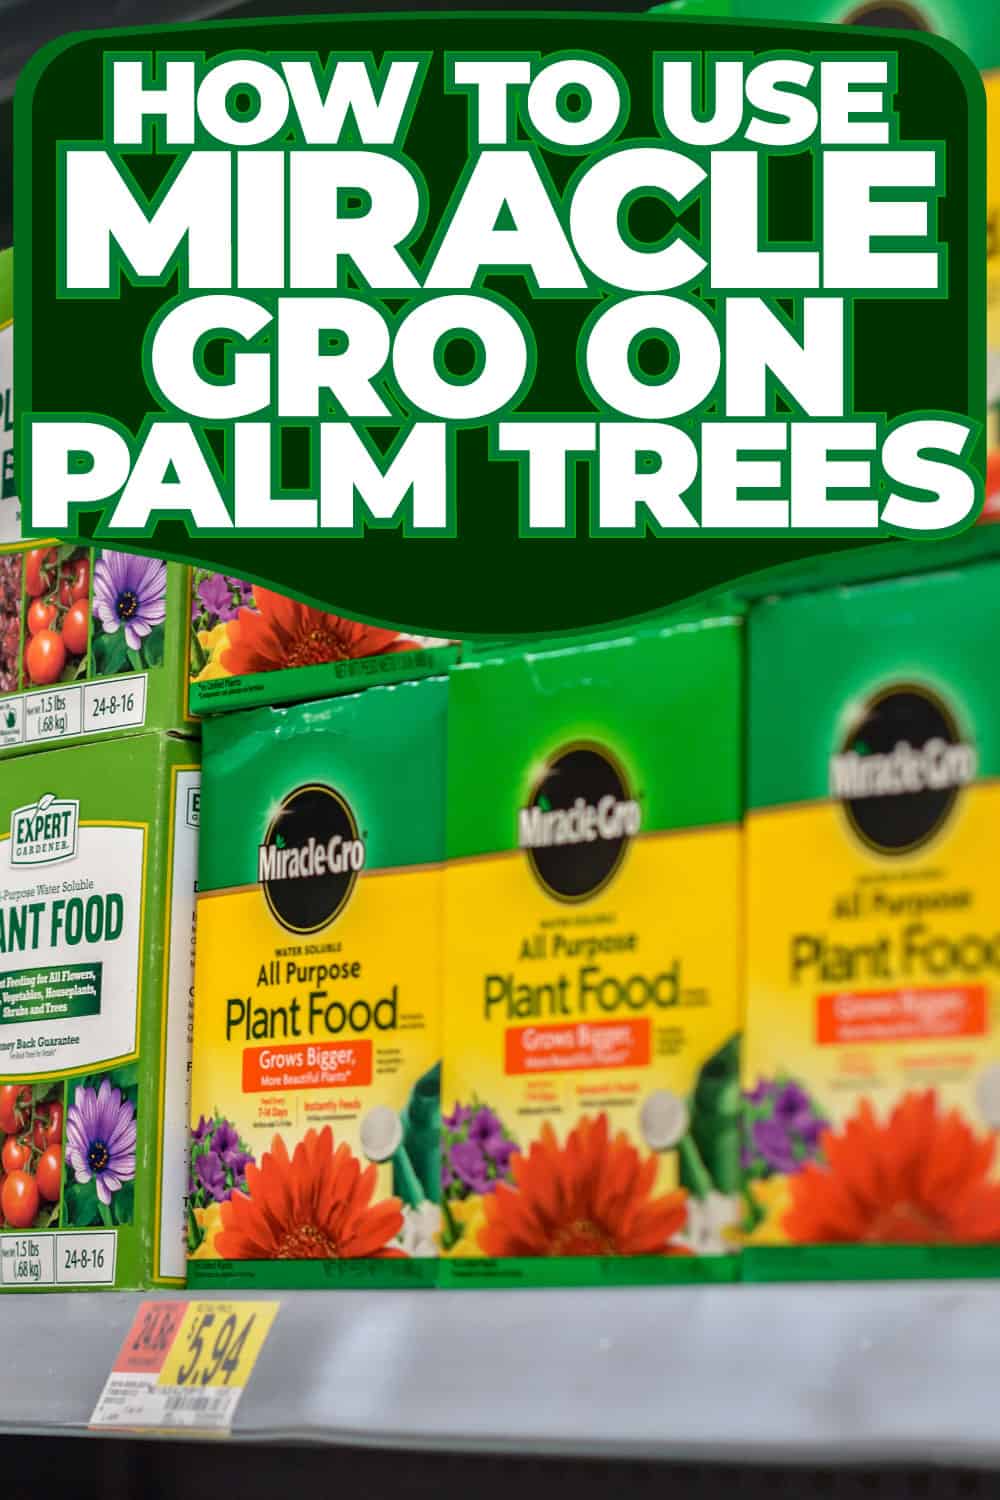 How To Use Miracle-Gro On Palm Trees